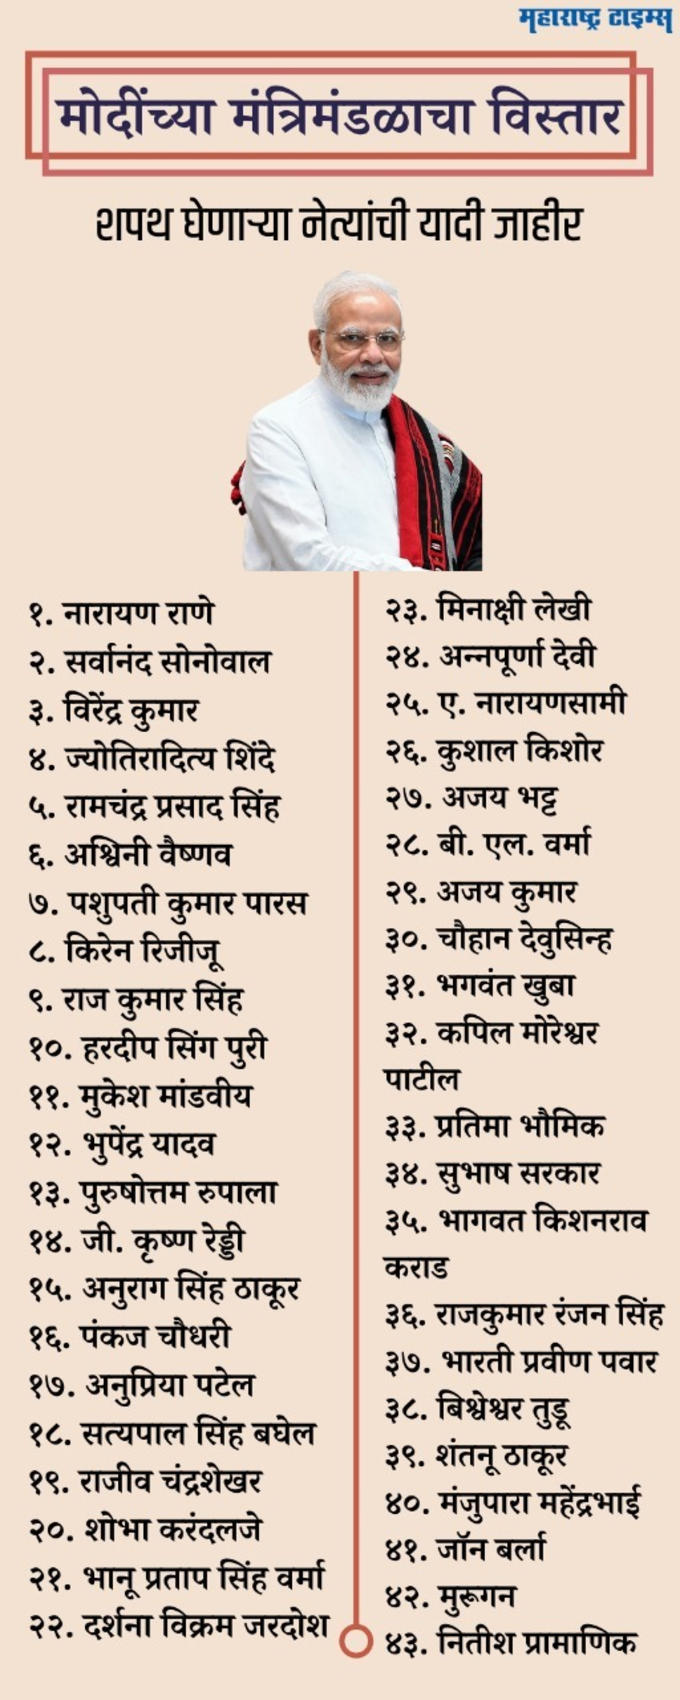 43 leaders to take oath today in the Union Cabinet expansion